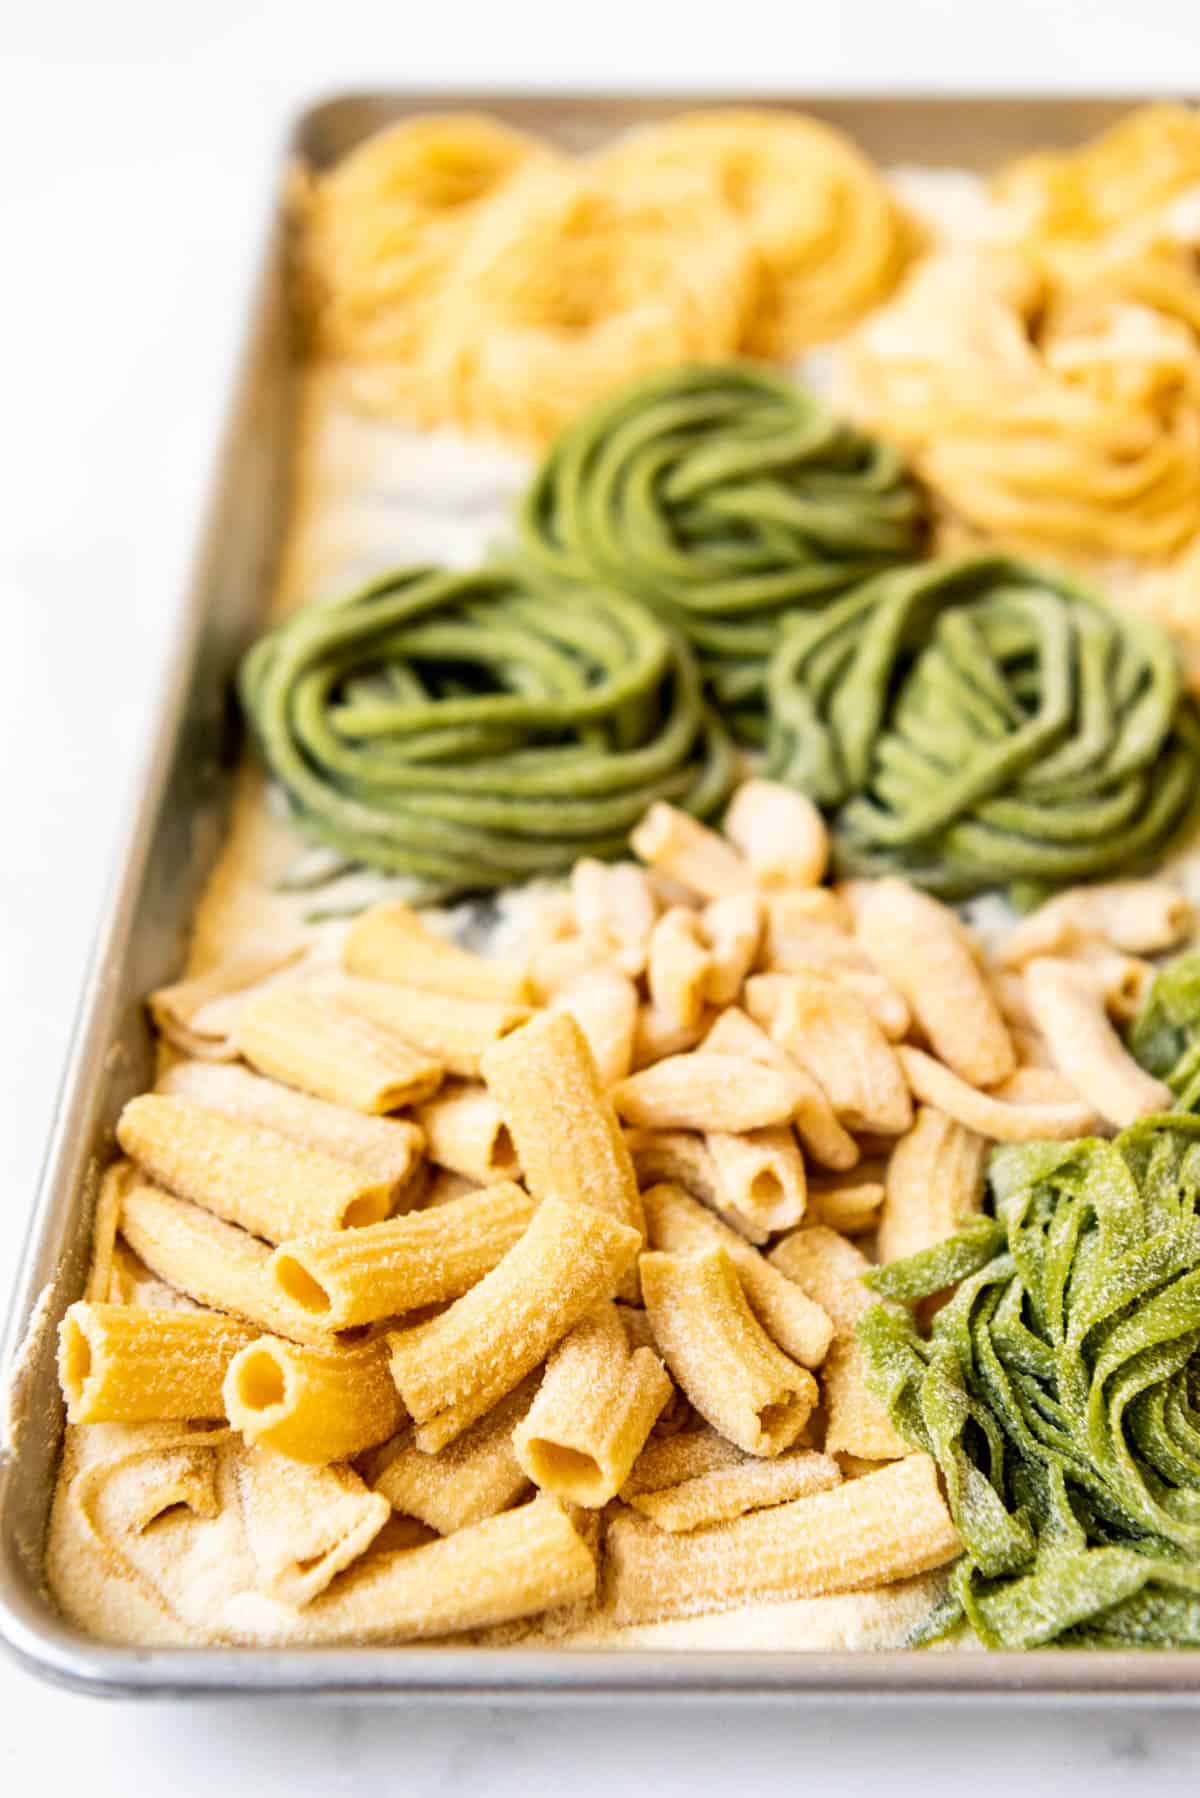 Homemade rigatoni pasta noodles next to spinach pasta in other shapes.